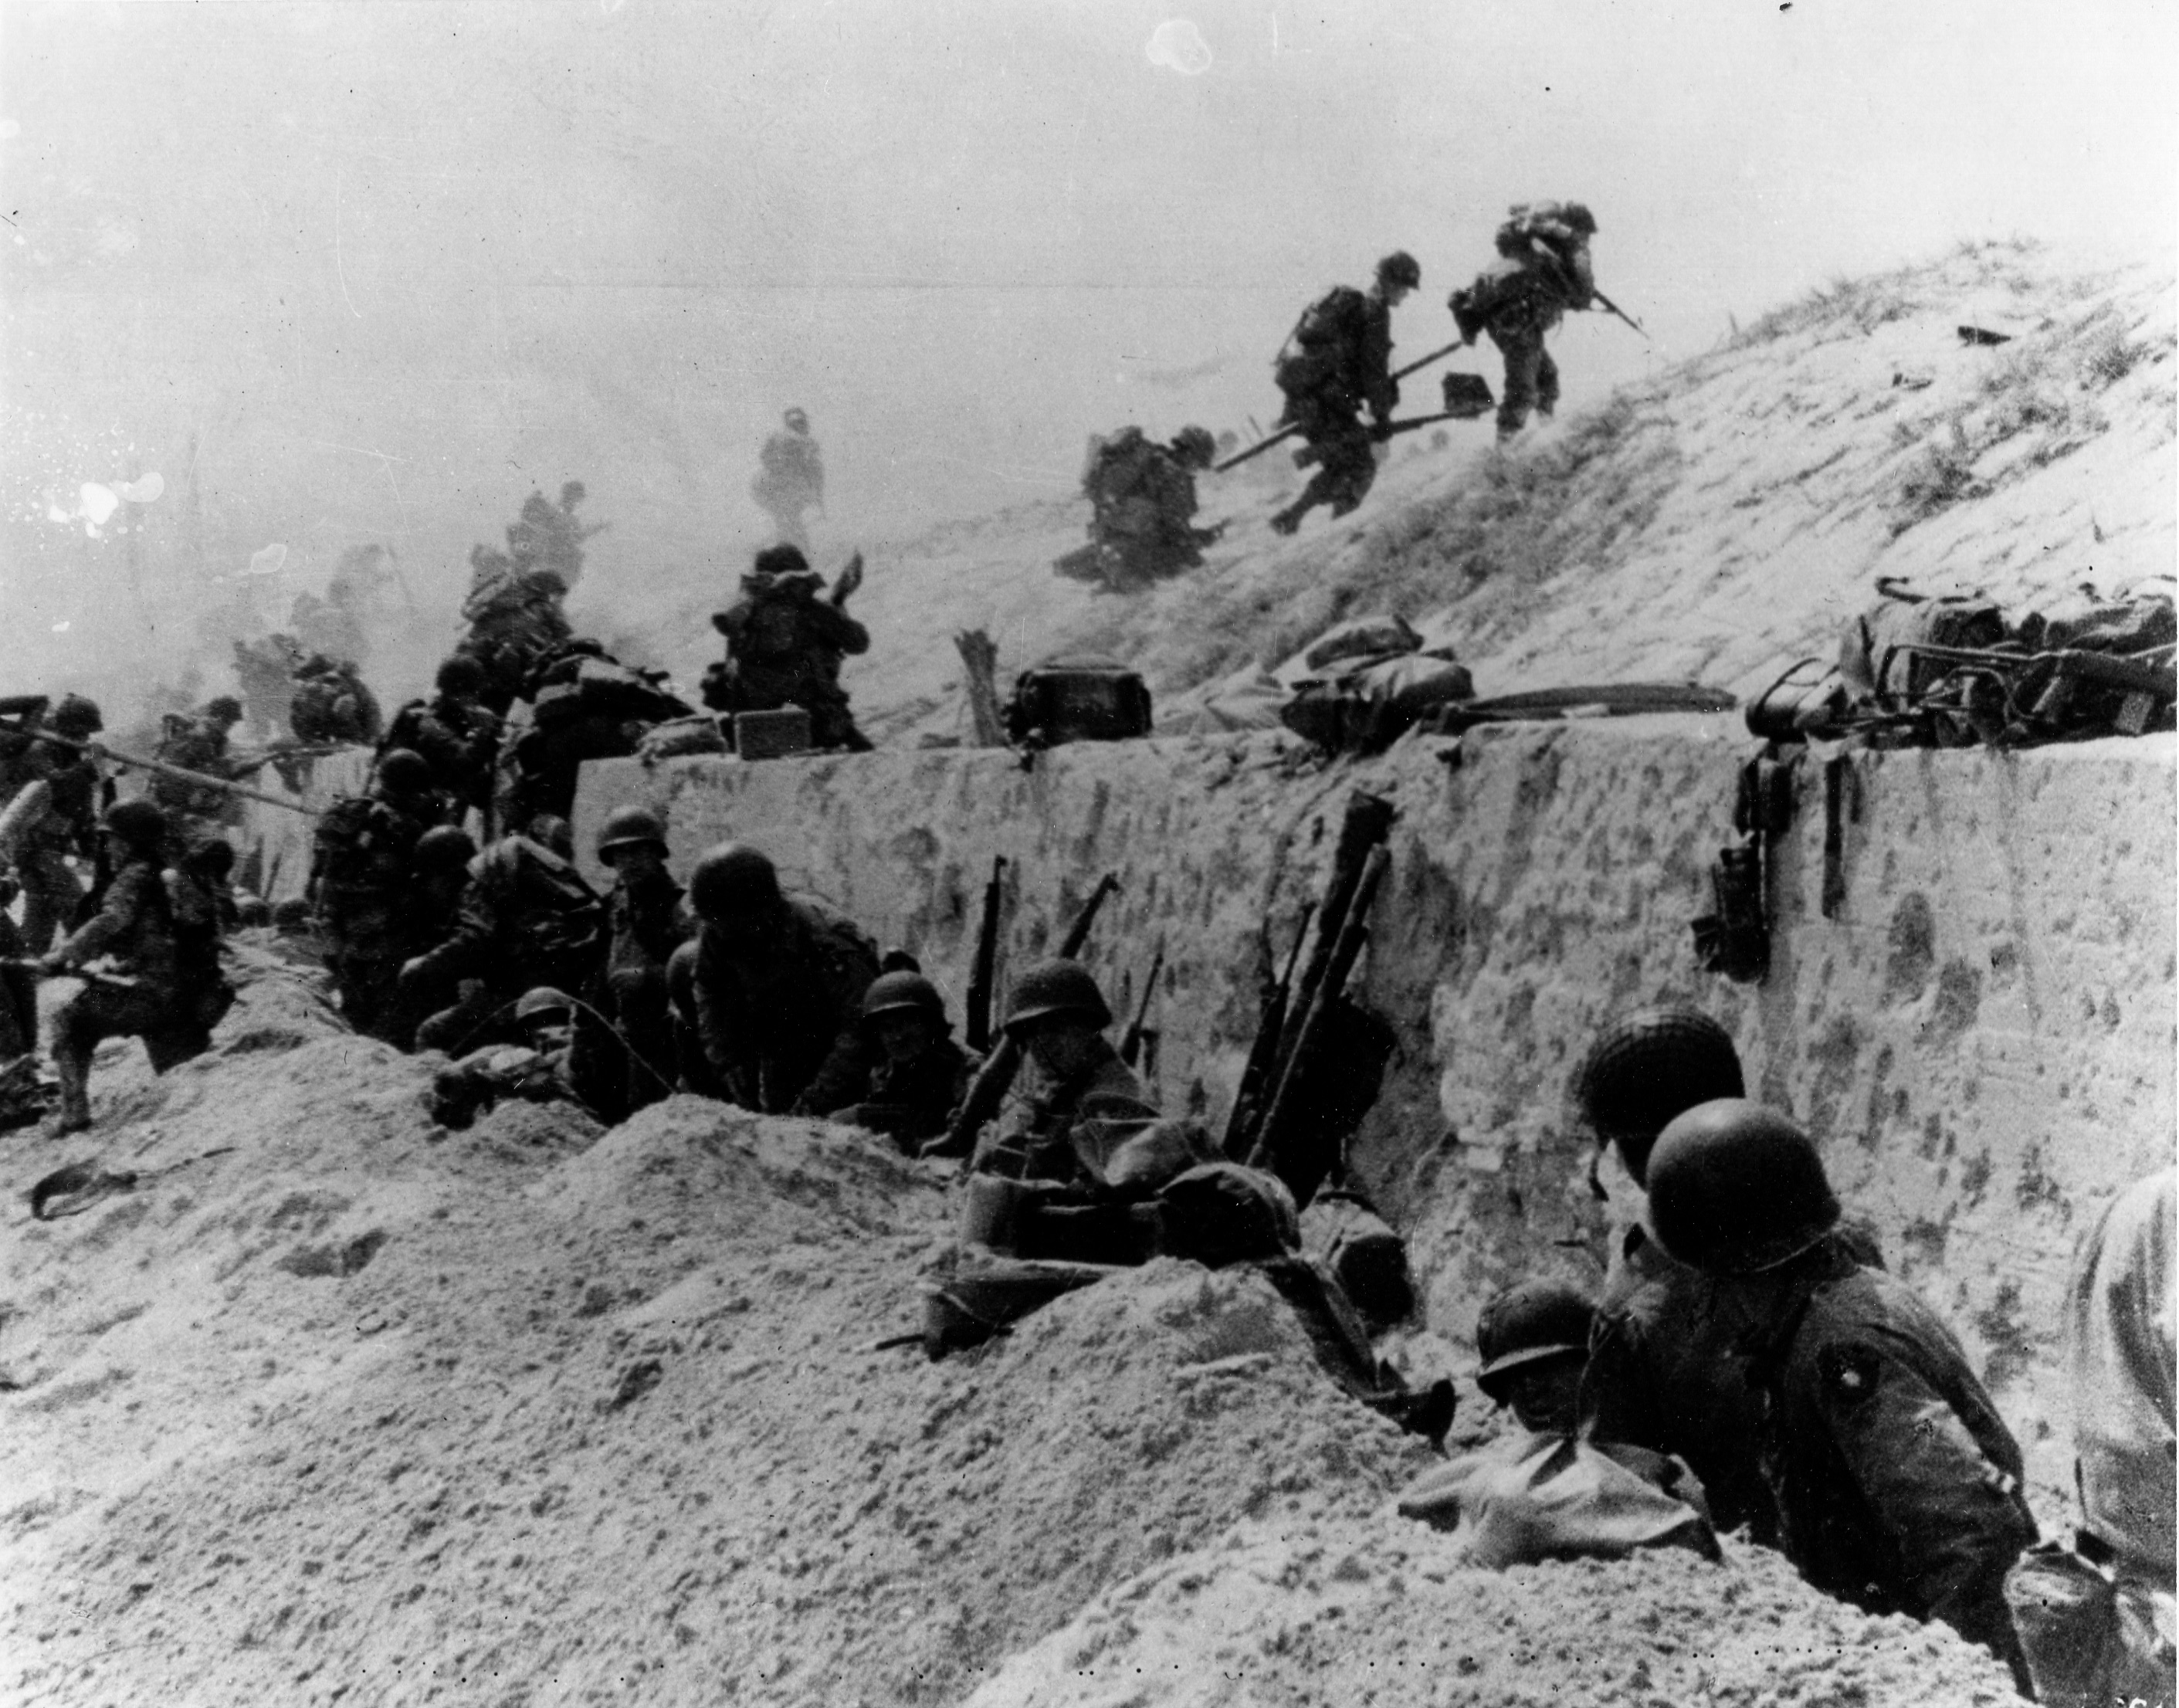 U.S. soldiers of the 4th Infantry Division move out over the seawall on Utah Beach. (Naval History and Heritage Command)